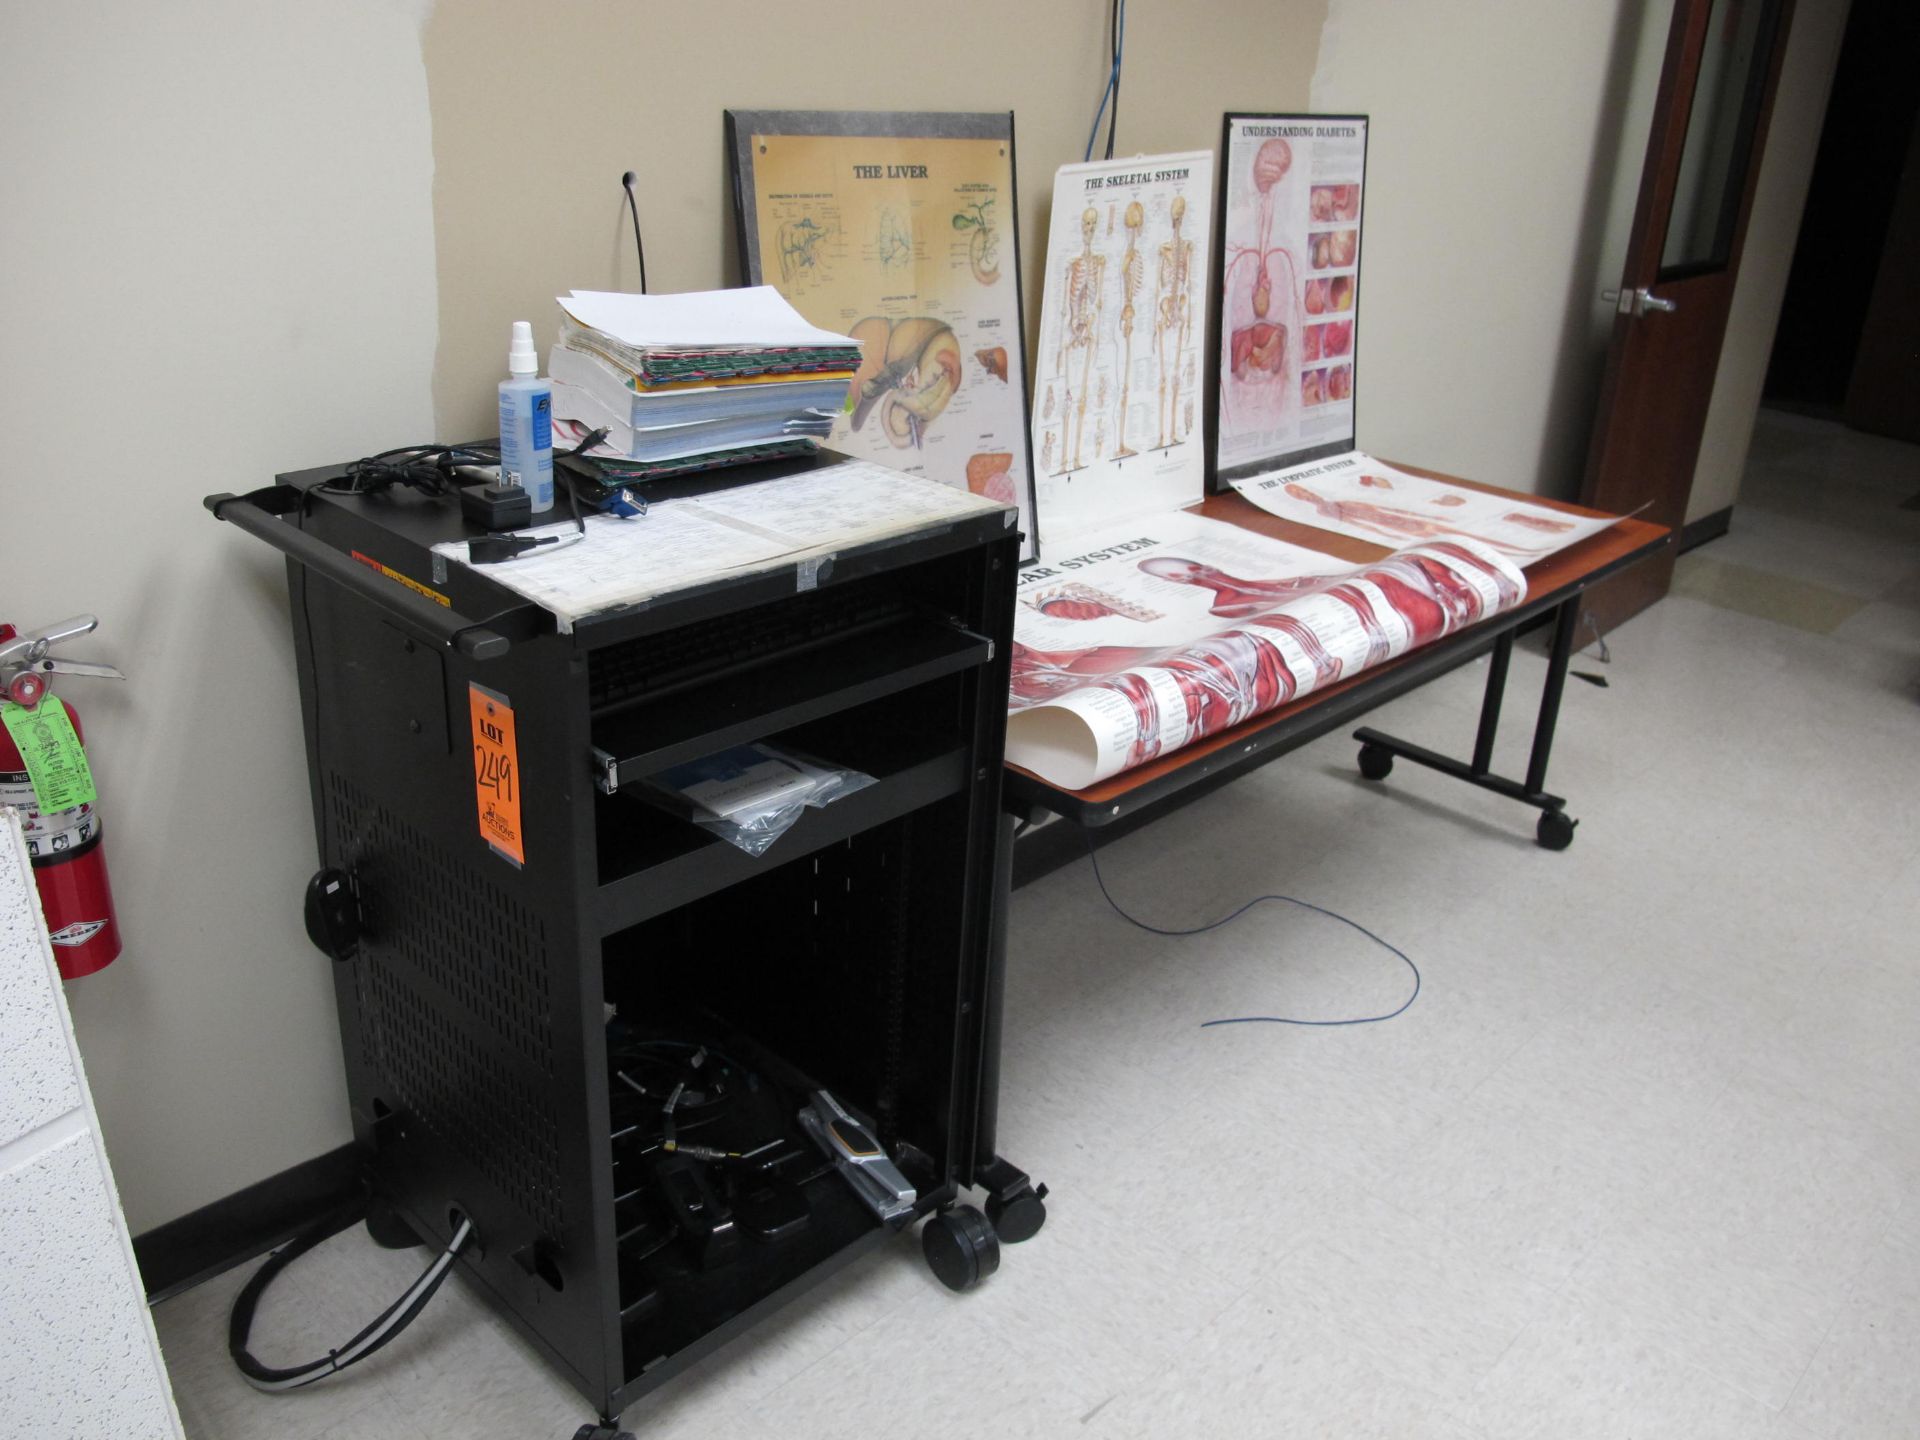 Lot including Audio/Video Cart, 6ft. X 30" Work Table, Medical Posters, Desk Organizers etc.